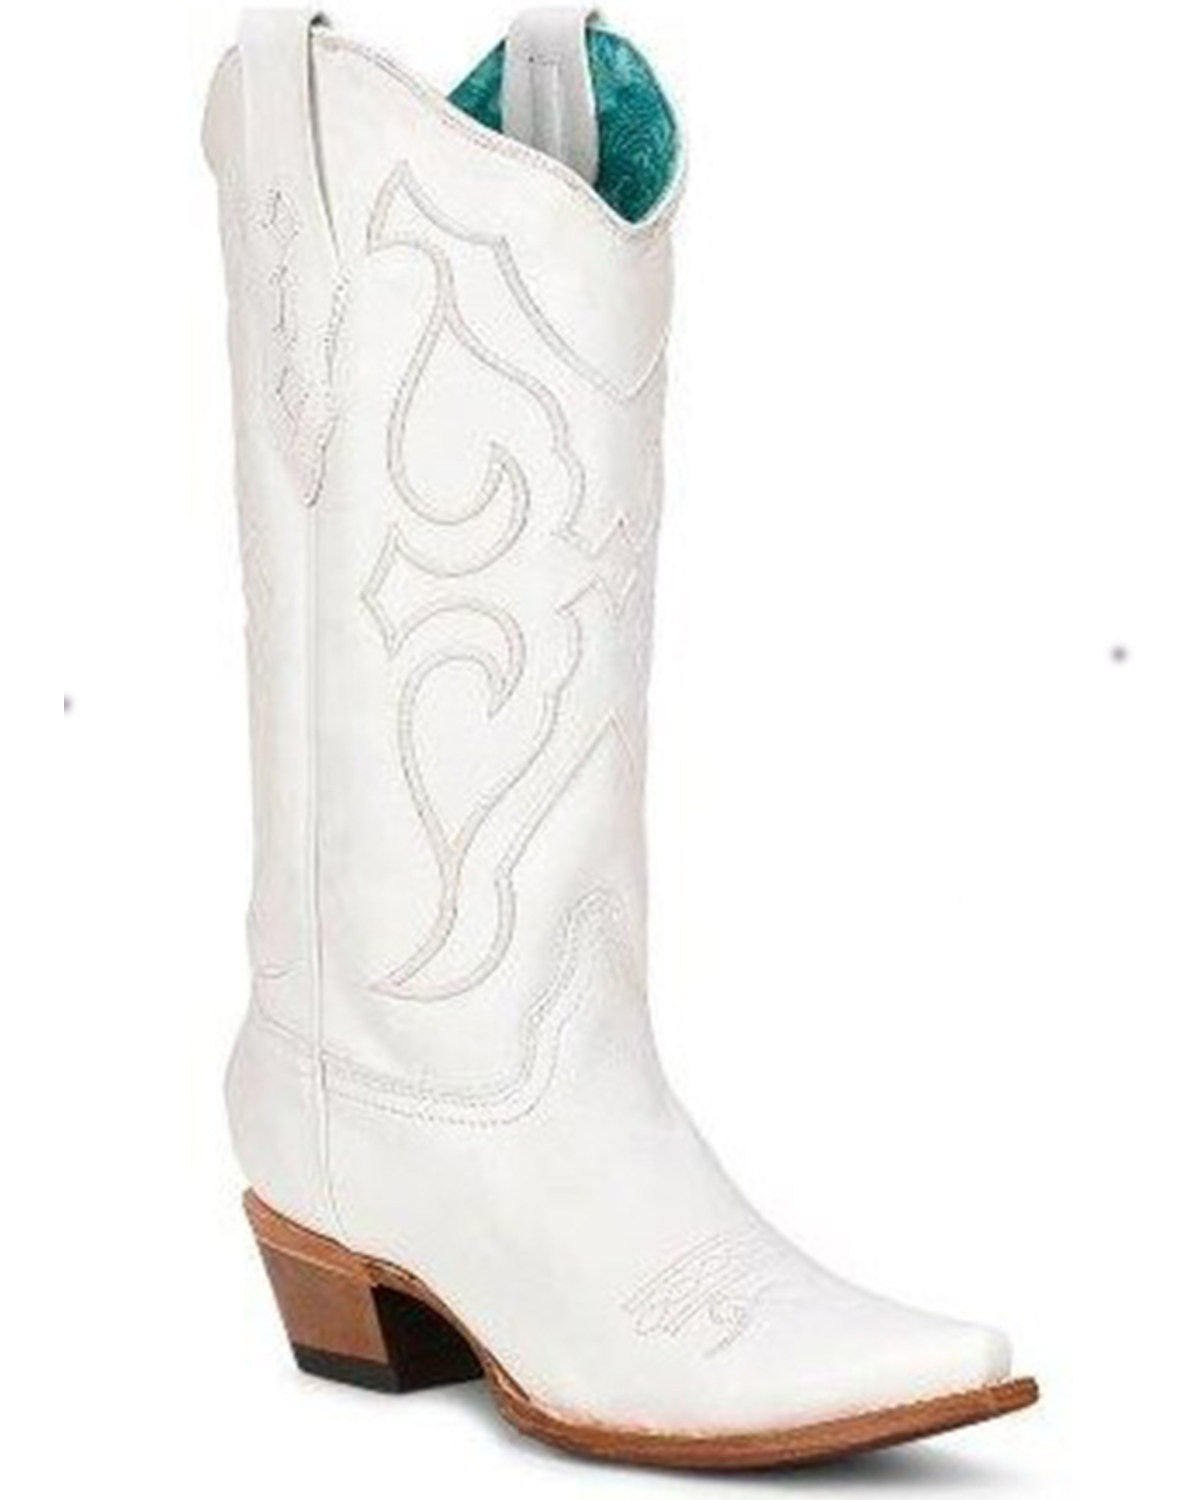 Corral Women's Embroidered Tall Western Boots - Snip Toe